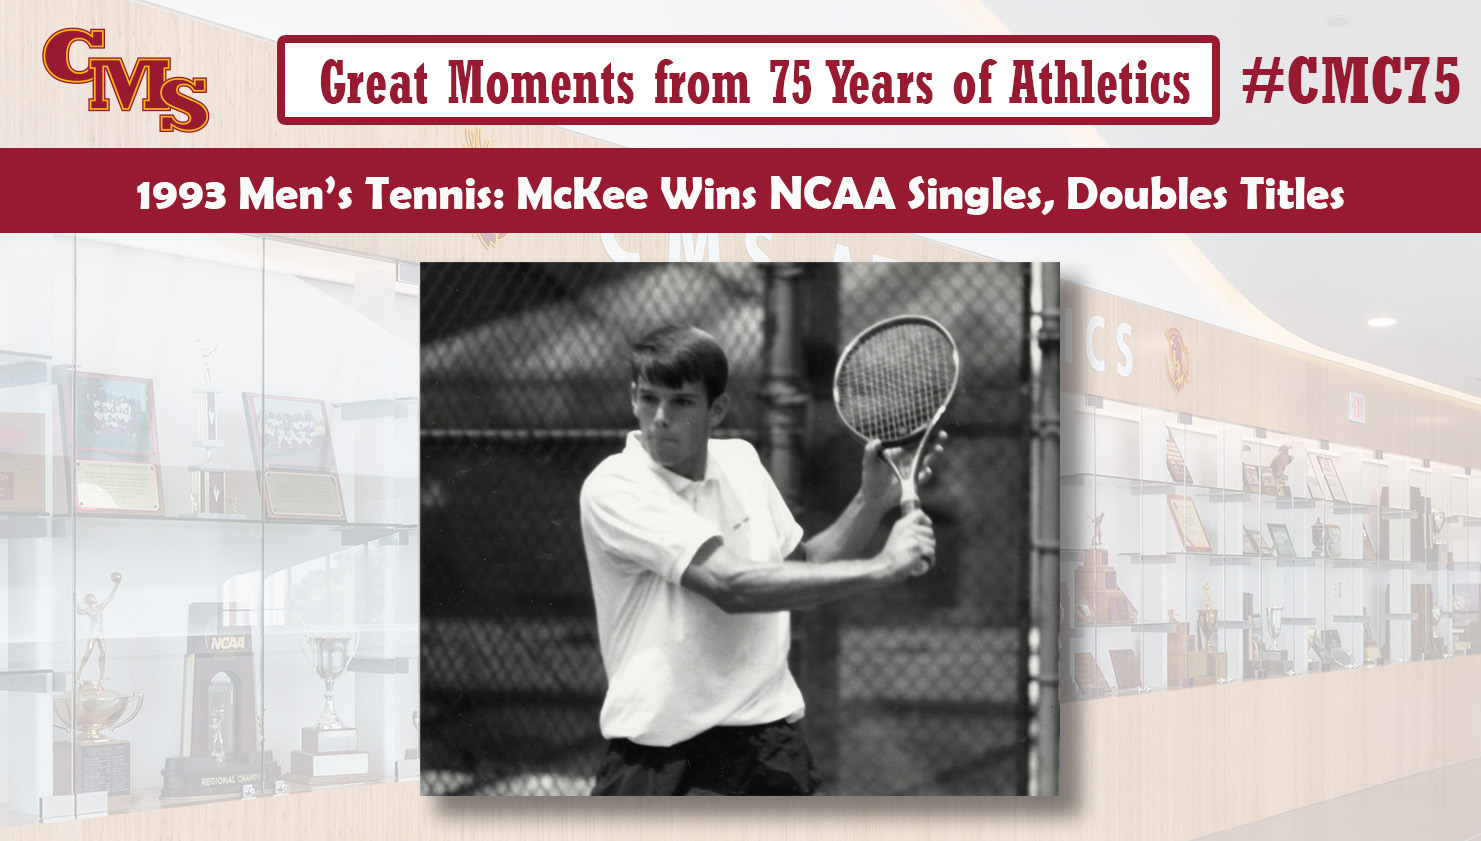 Ryan McKee action shot. Words over the photo read: Great Moments from 75 Years of Athletics, 1993 Men's Tennis: McKee Wins NCAA Singles, Doubles Titles